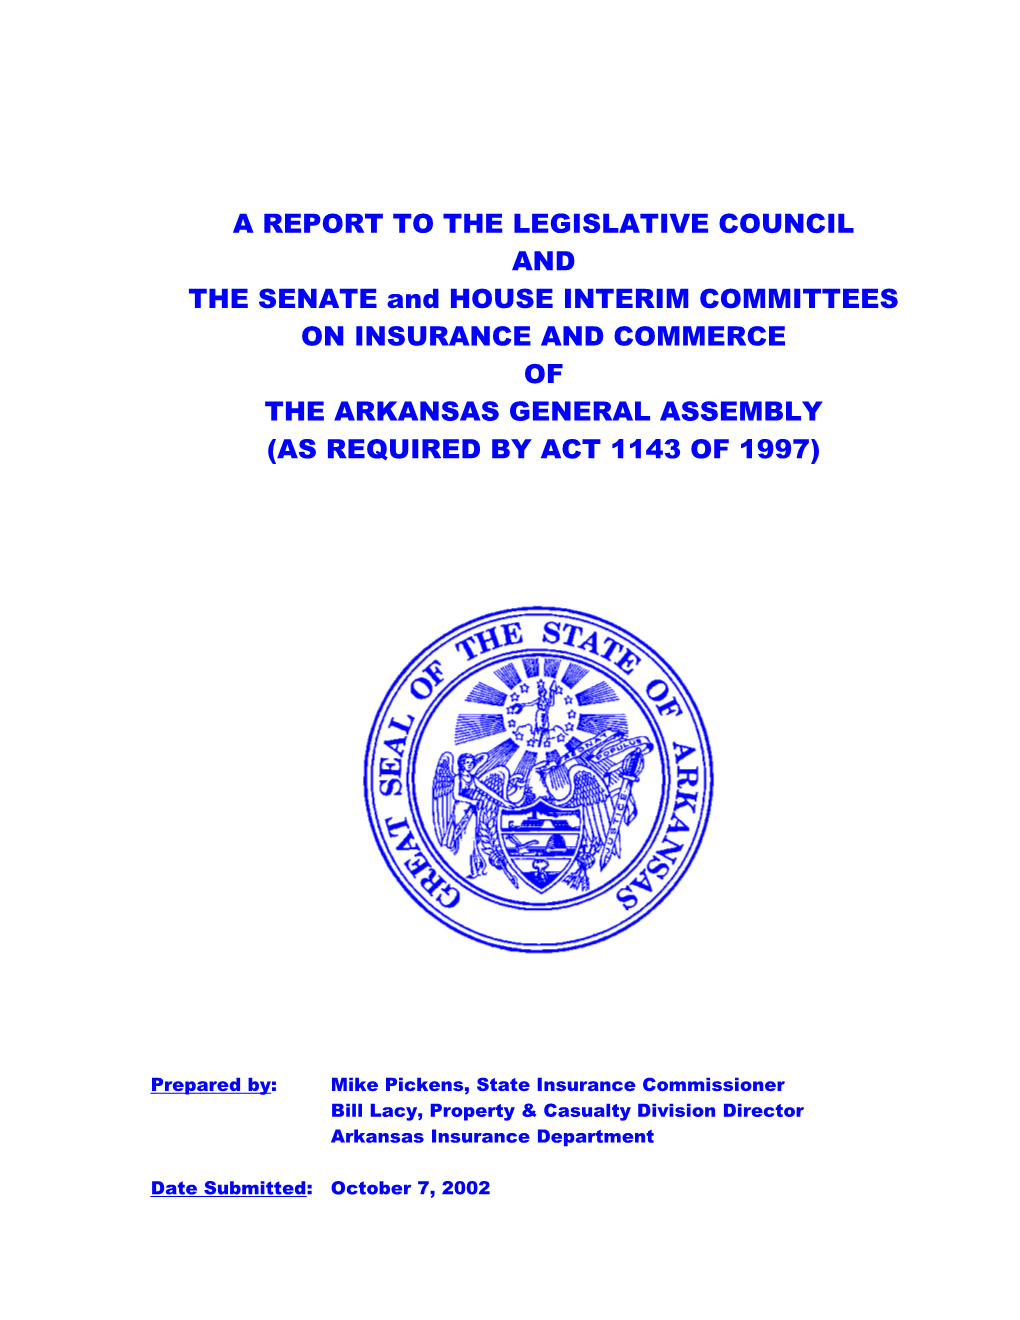 2001 Report to the Legislative Council and The